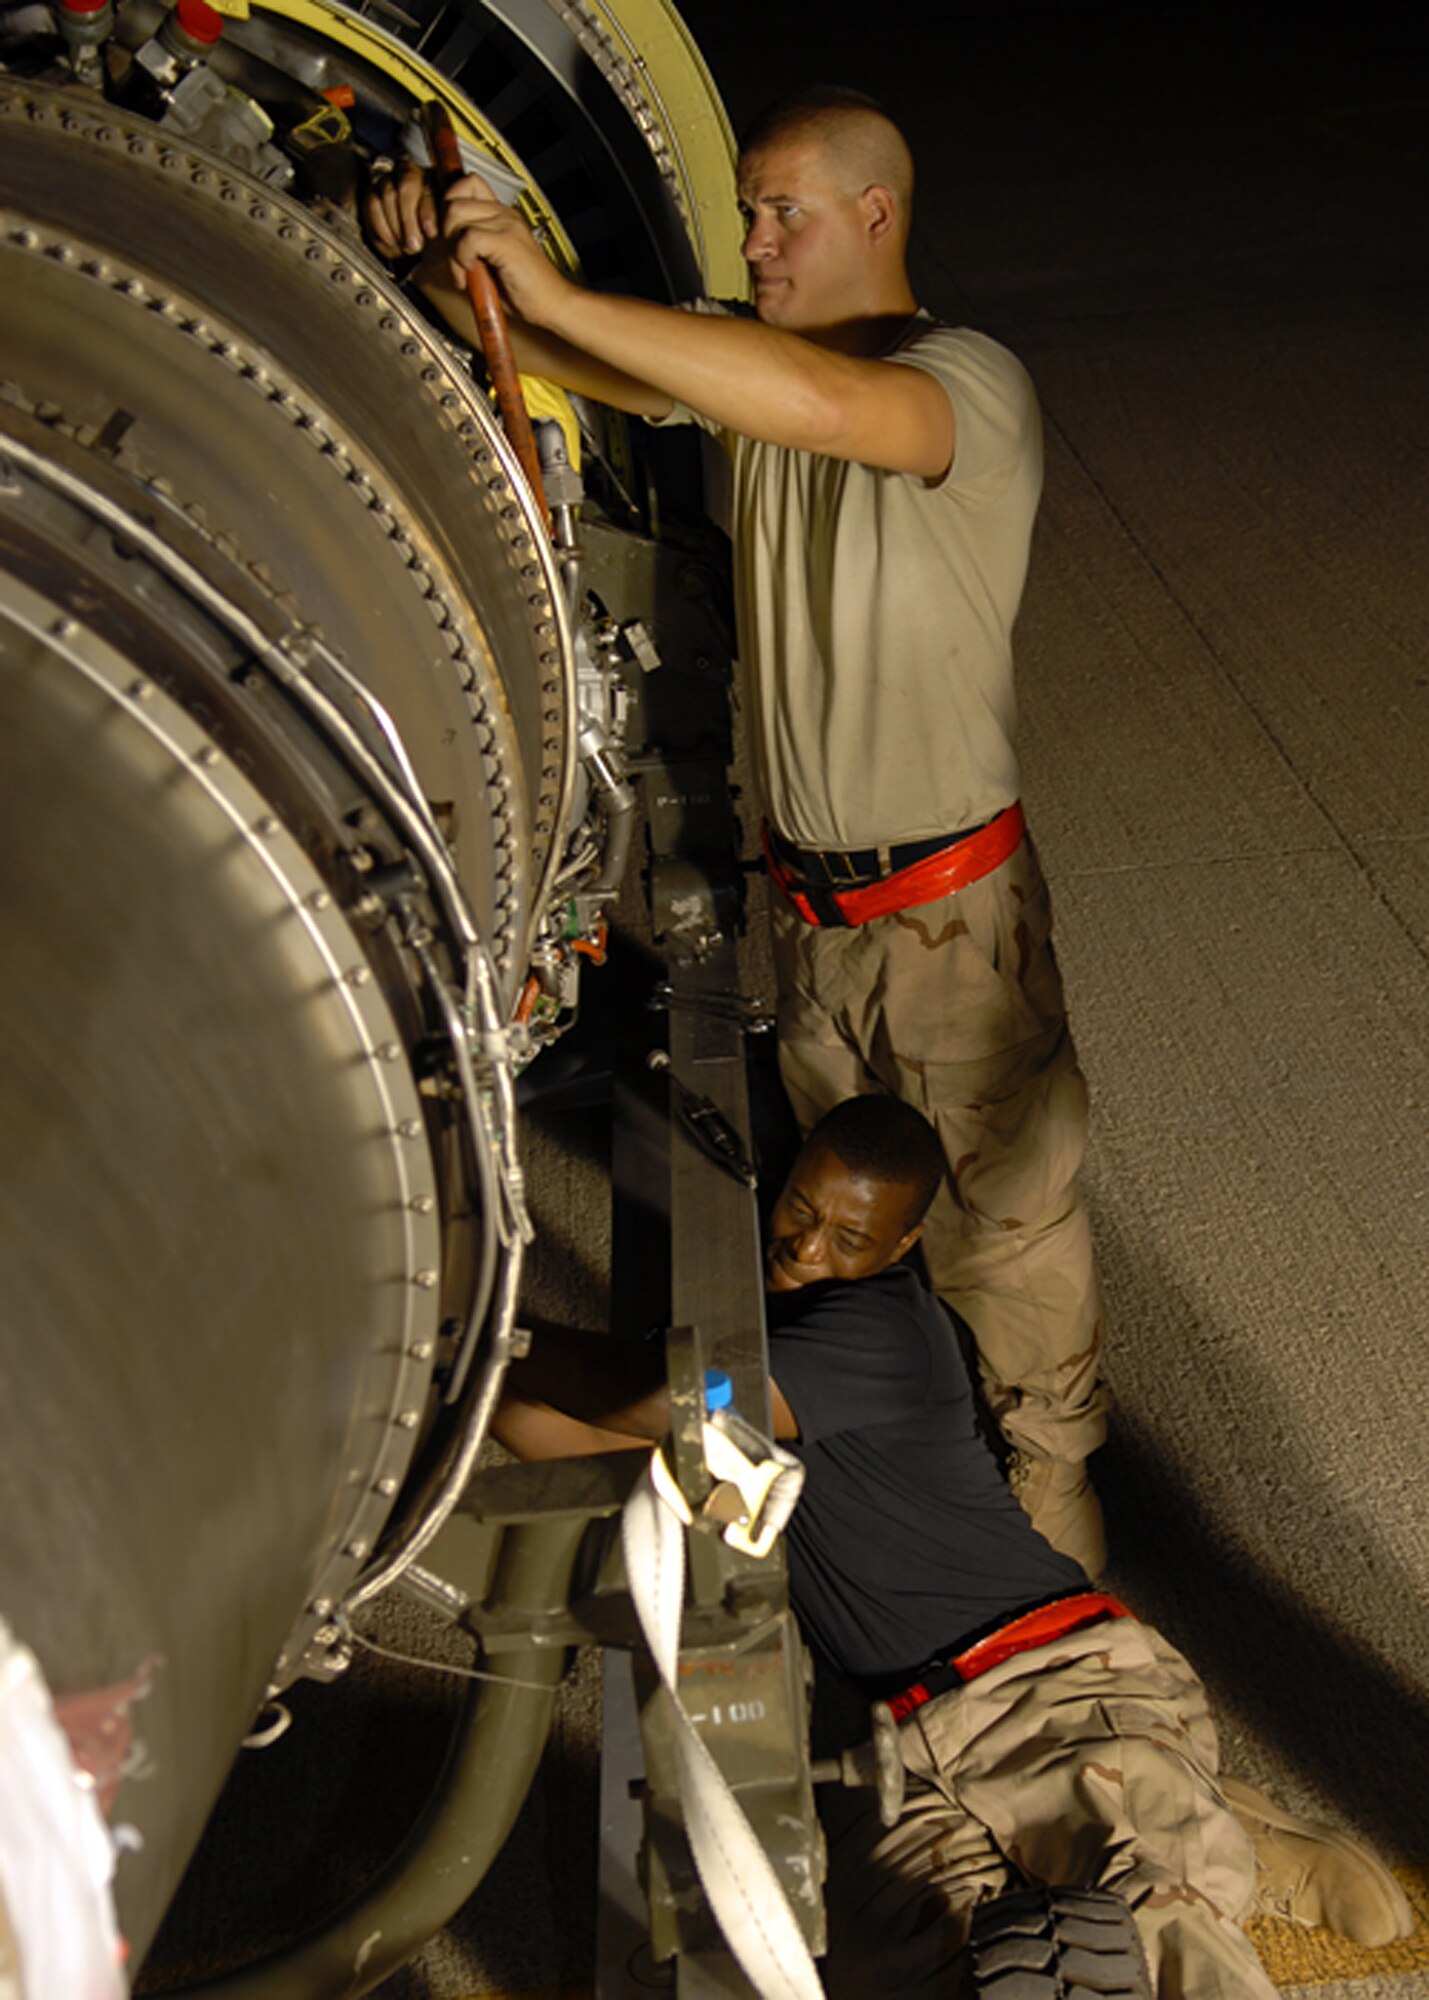 SOUTHWEST ASIA -- Staff Sgt. Bradley Barnes (standing), an engine systems specialist with the 380th Expeditionary Maintenance Squadron, prepares the throttle cable during an engine replacement on an Airborne Warning and Control System aircraft, or E-3 Sentry, here Sunday. Senior Airman Marcus Wilson, 380th EAMXS electro-environmental specialist, assists crew mates on the removal of the hydraulics package. This rotation of 380th EAMXS E-3 maintainers has replaced an unprecedented six engines in 120 days. (U.S. Air Force Photo/Tech. Sgt. Denise Johnson)(released)